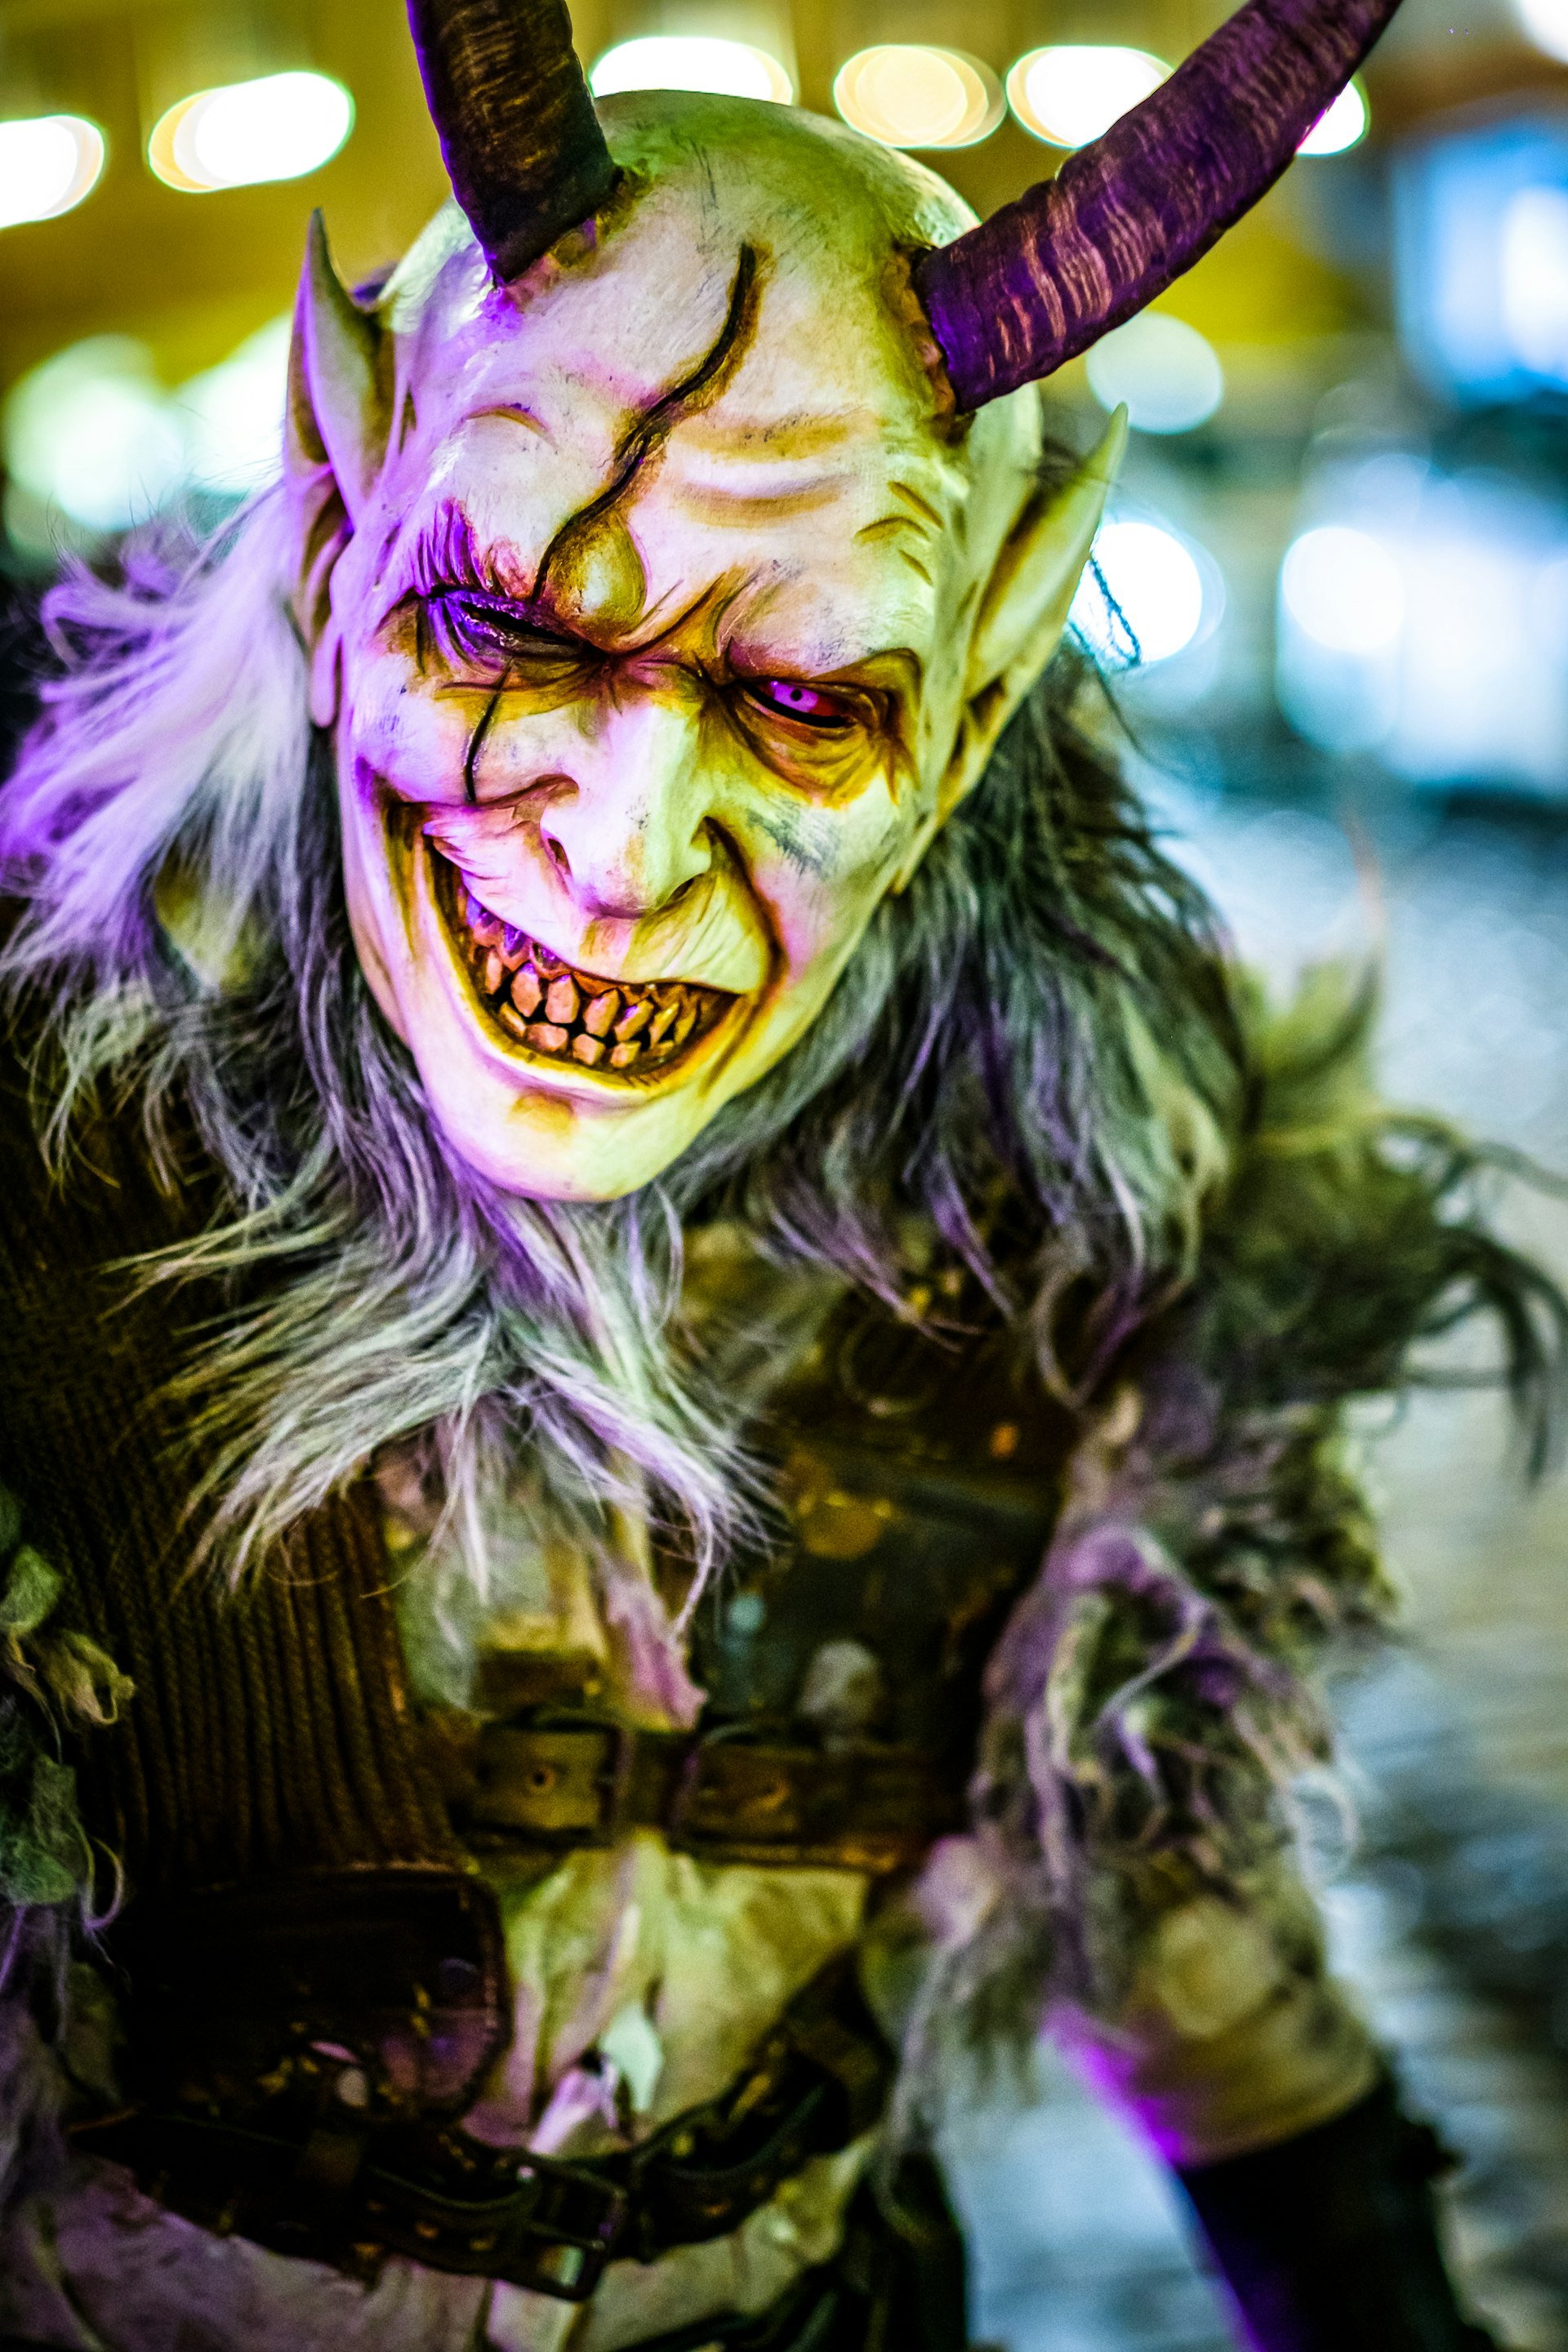 Closeup of a person dressed up in a ghoulish Krampus demon costume